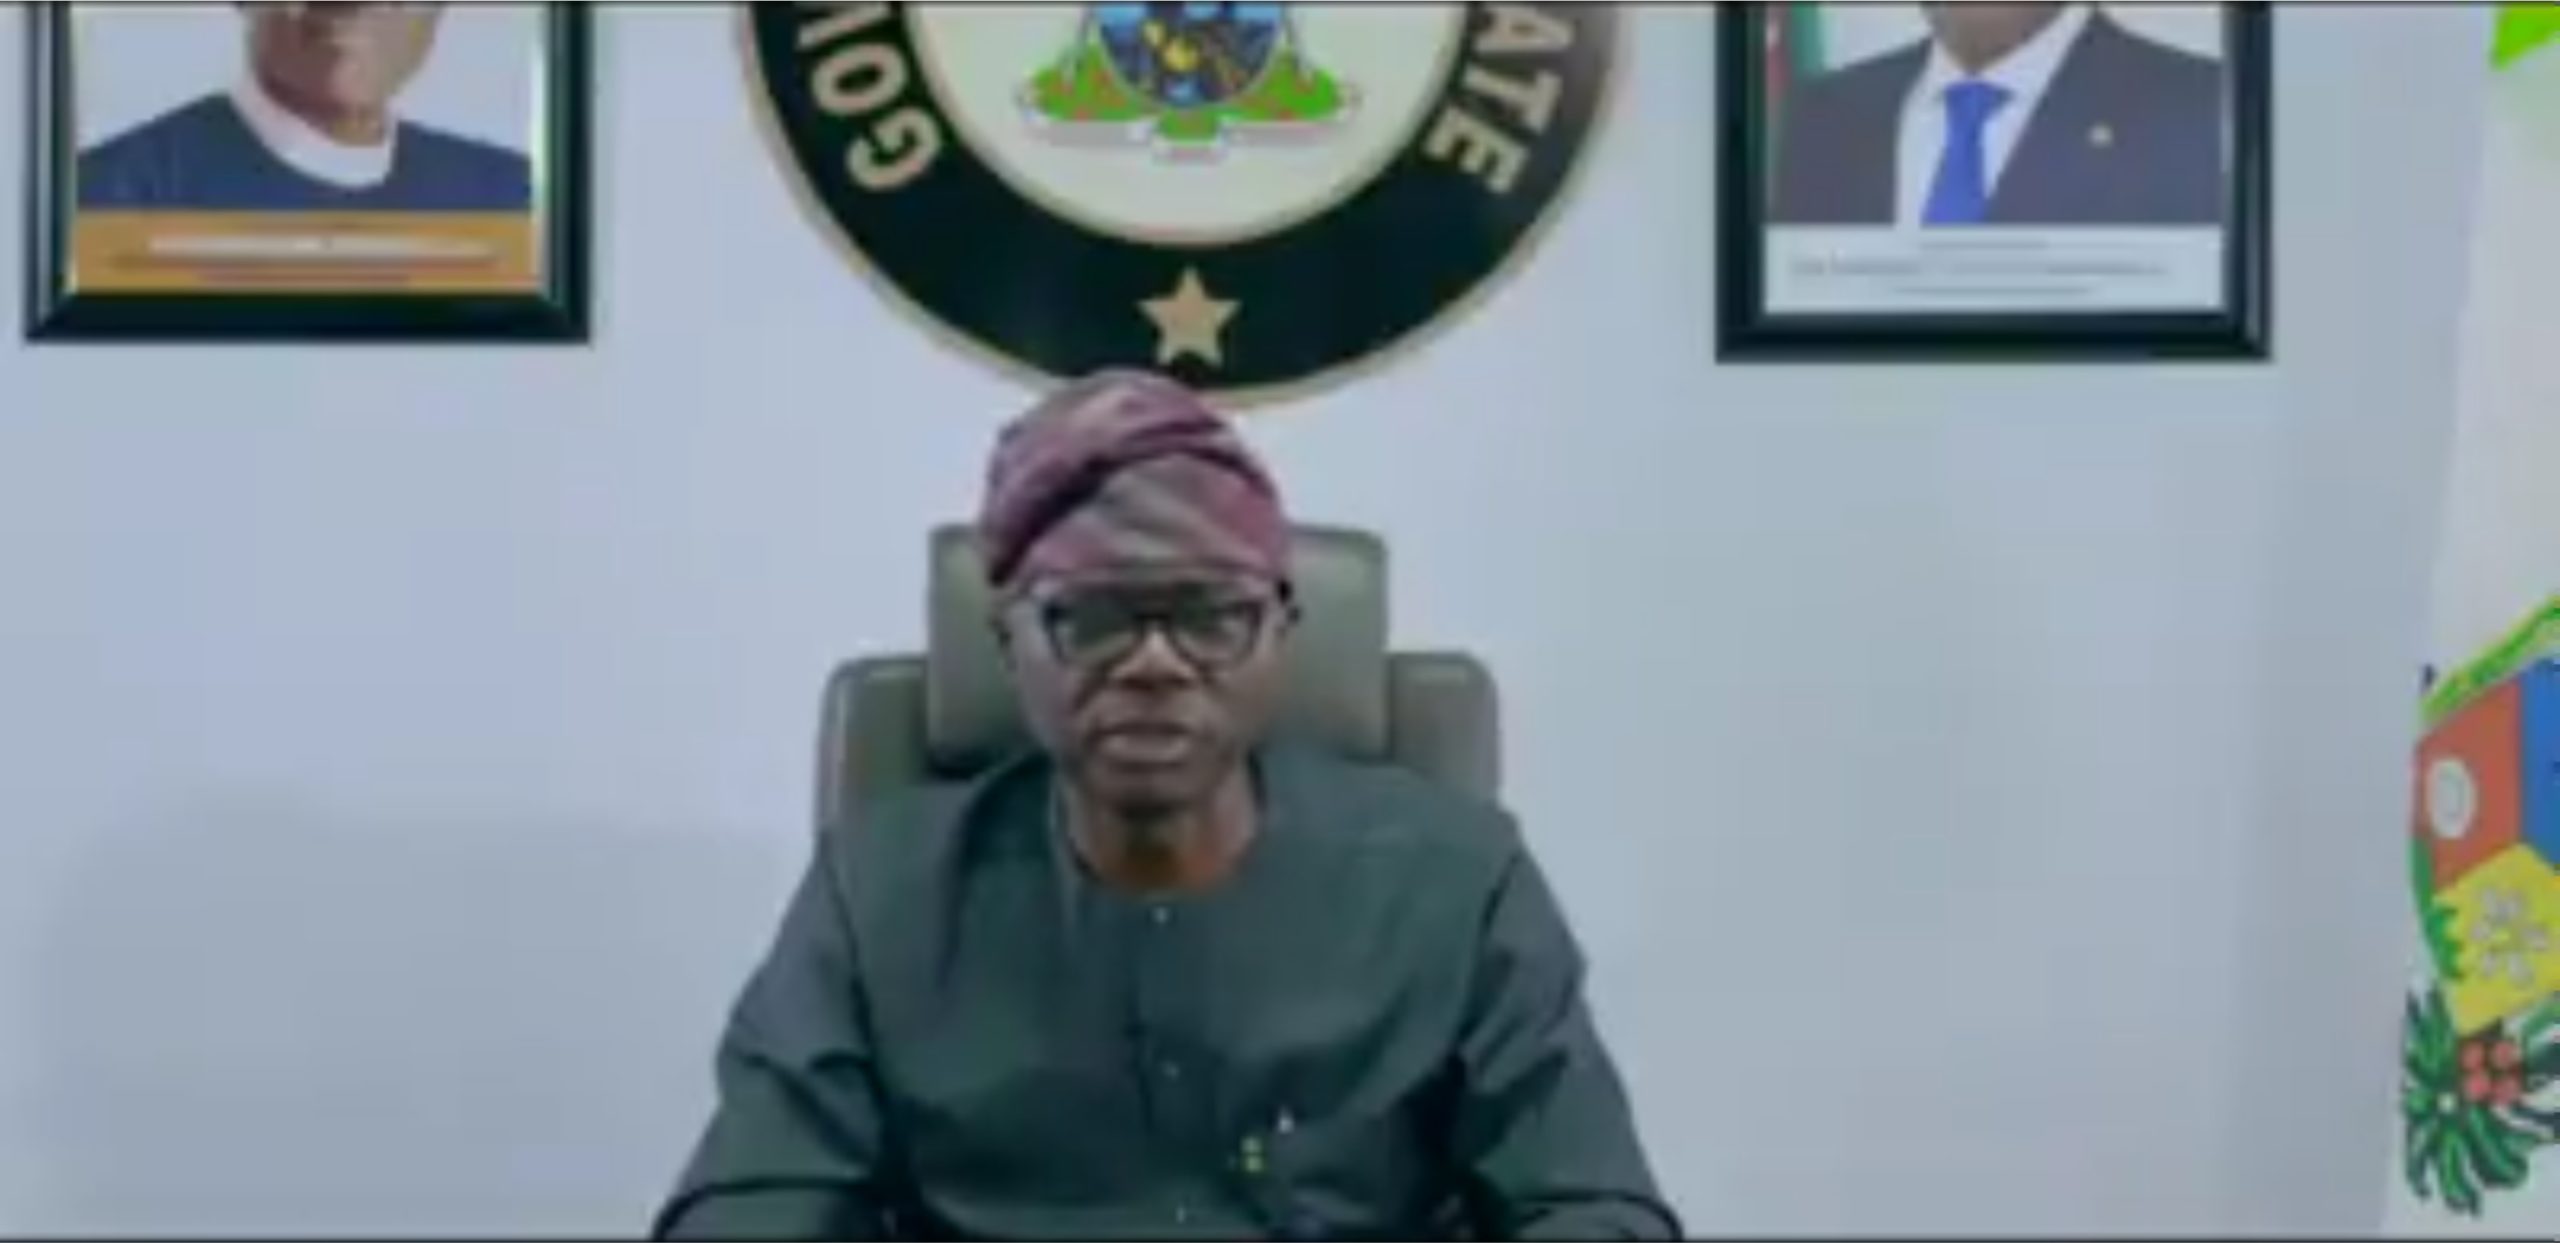 Dear residents and investors, Lagos is open for business and pleasure – Governor Babajide Sanwo-Olu